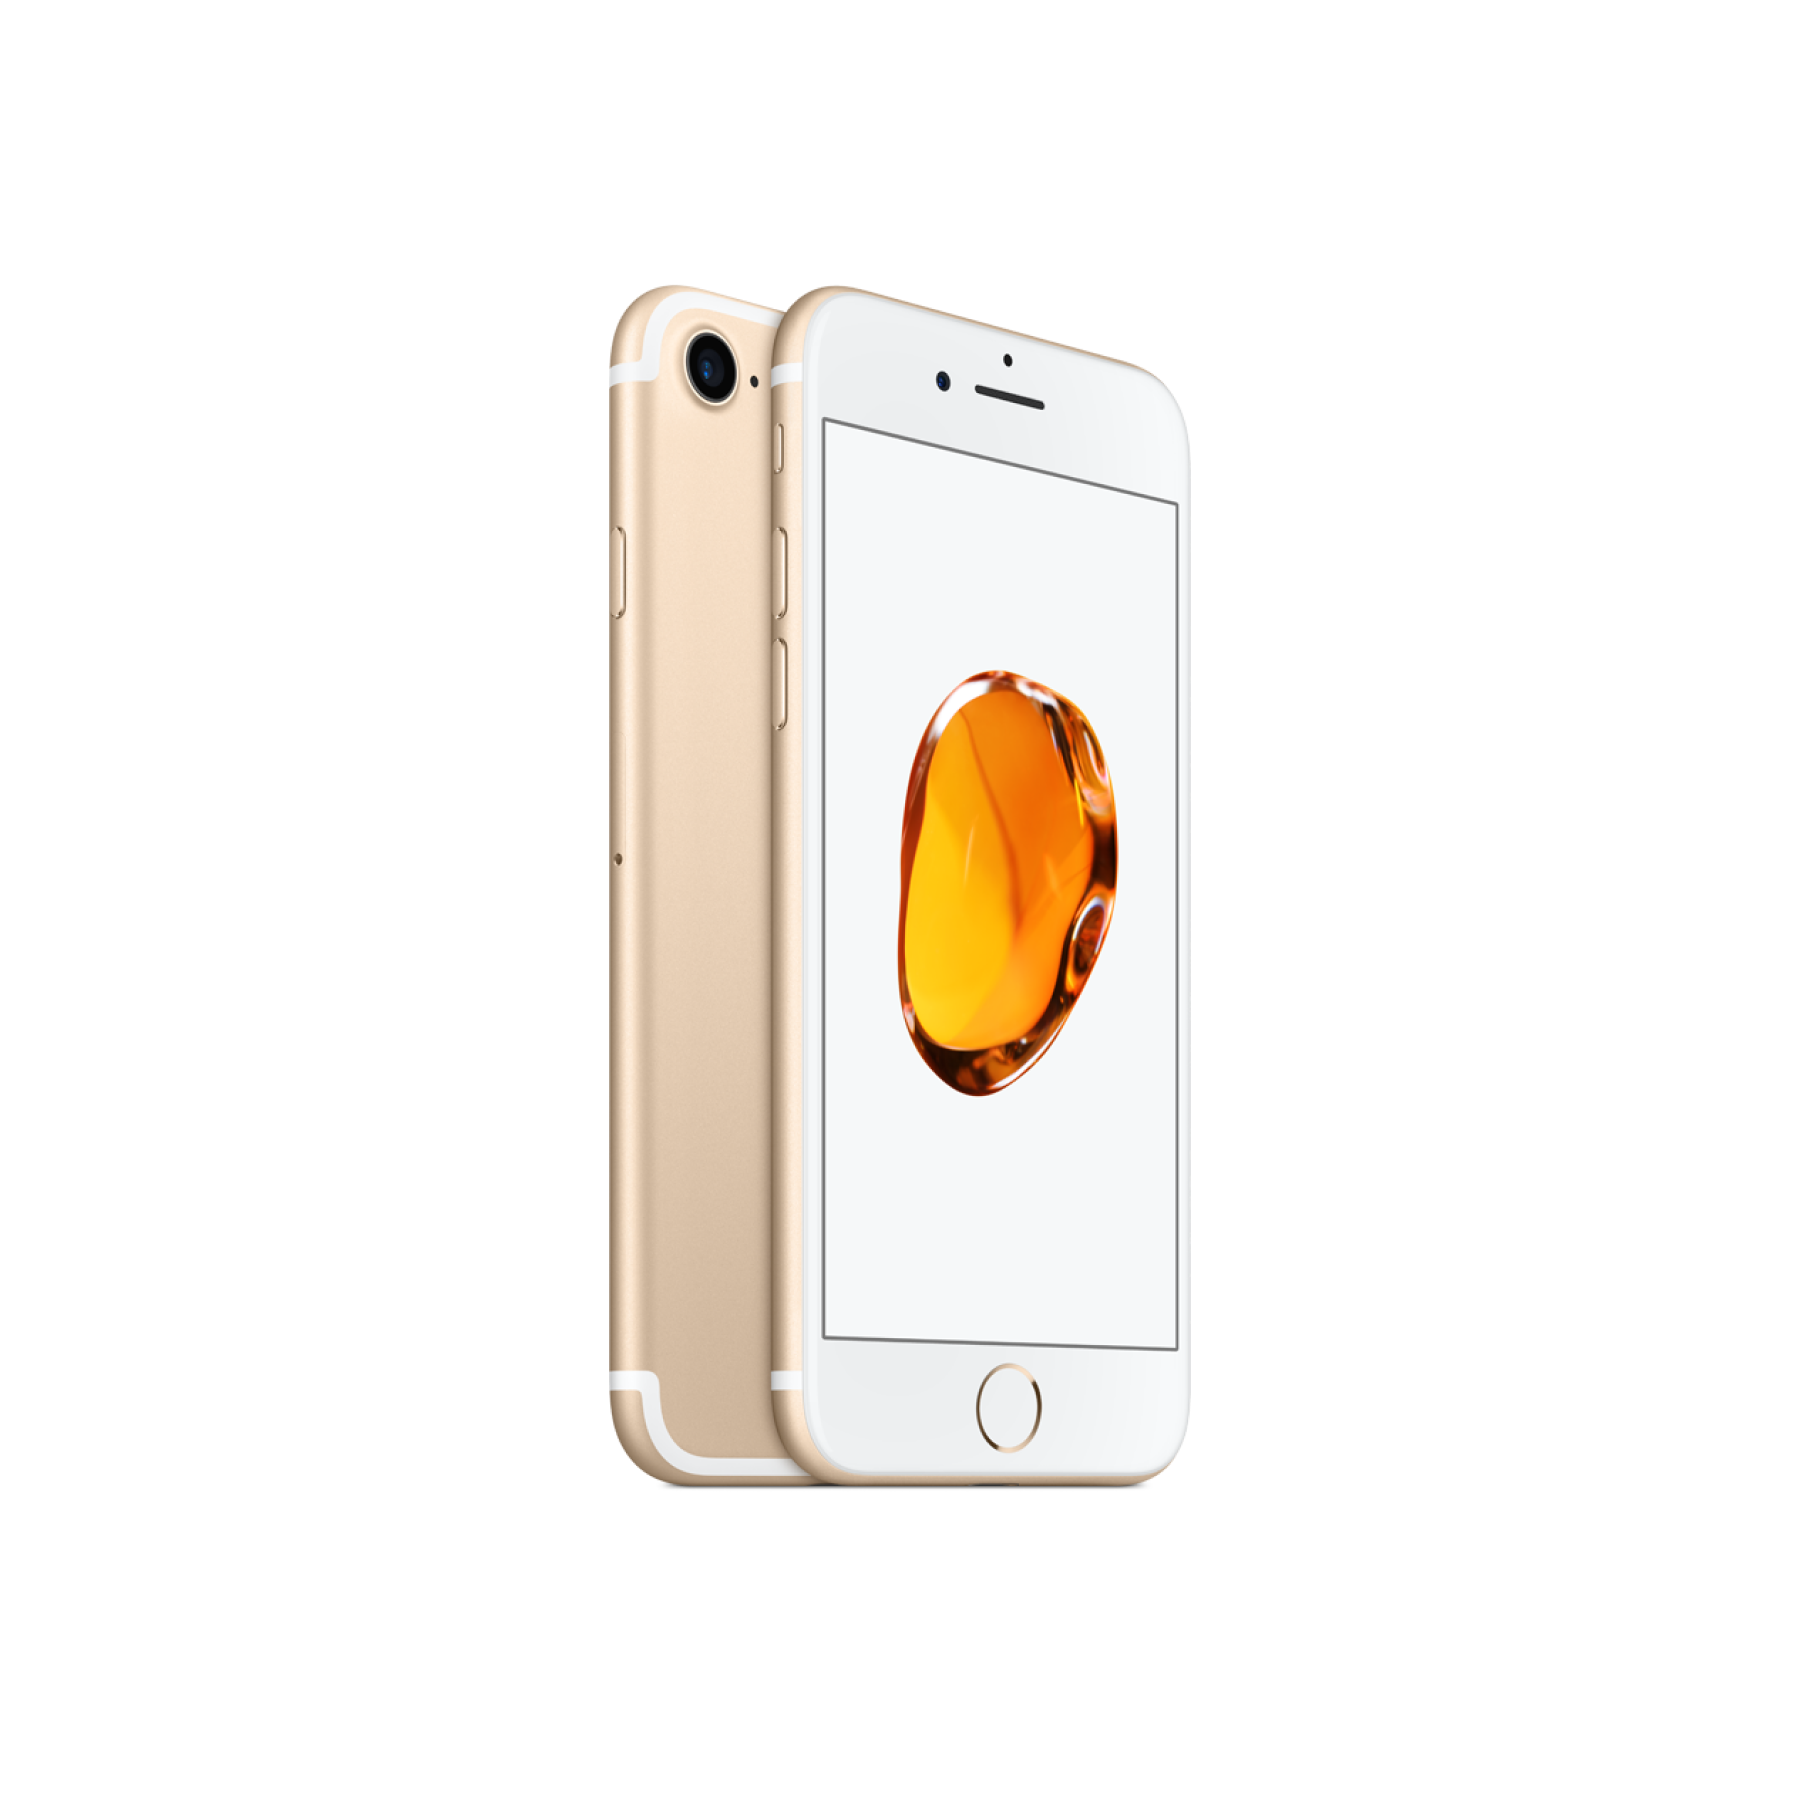 iPhone 7 plus price in Pakistan - Buy on cheapest price